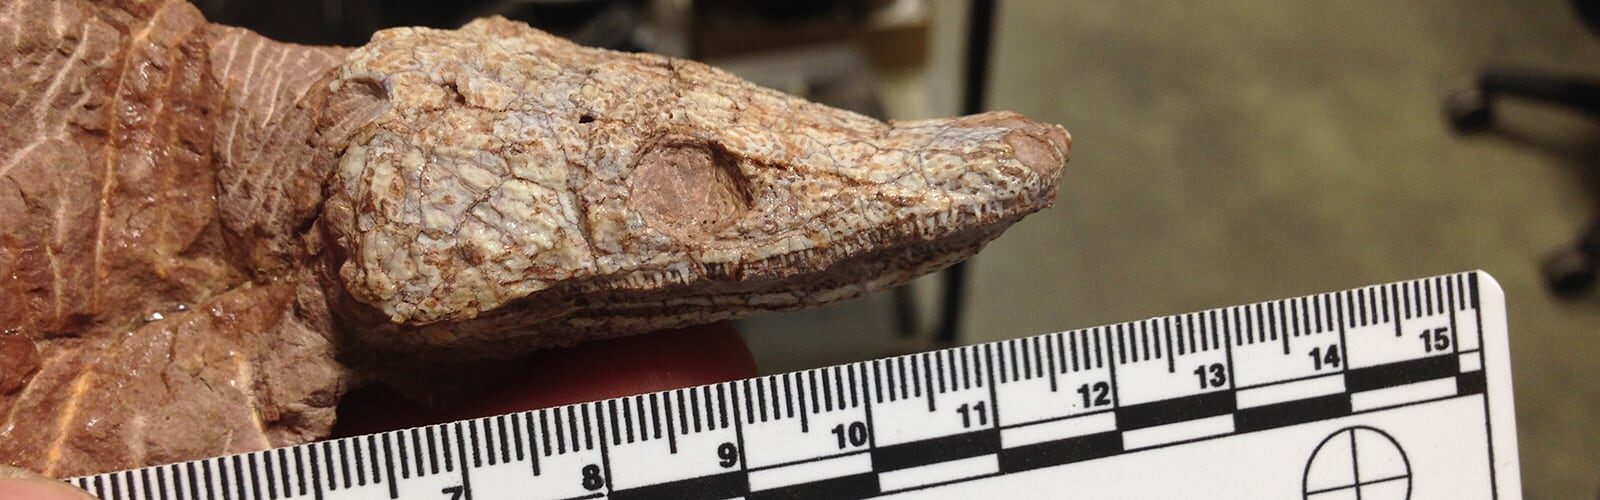 A fossilized prehistoric reptile is measured with a ruler.